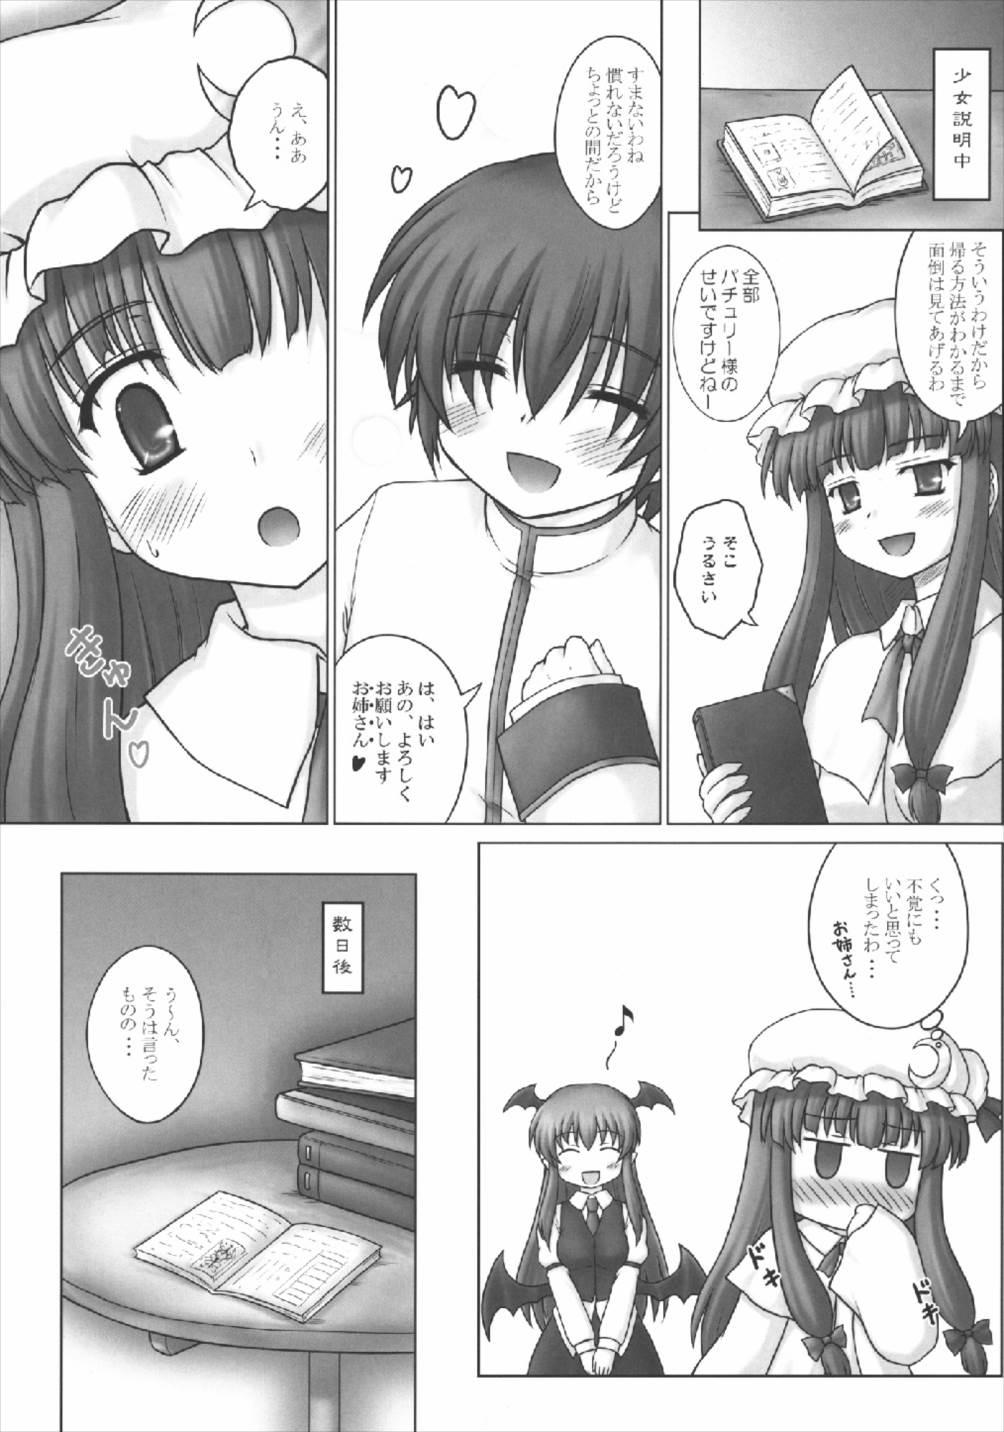 Russian Onee-chan no East - Touhou project Com - Page 5